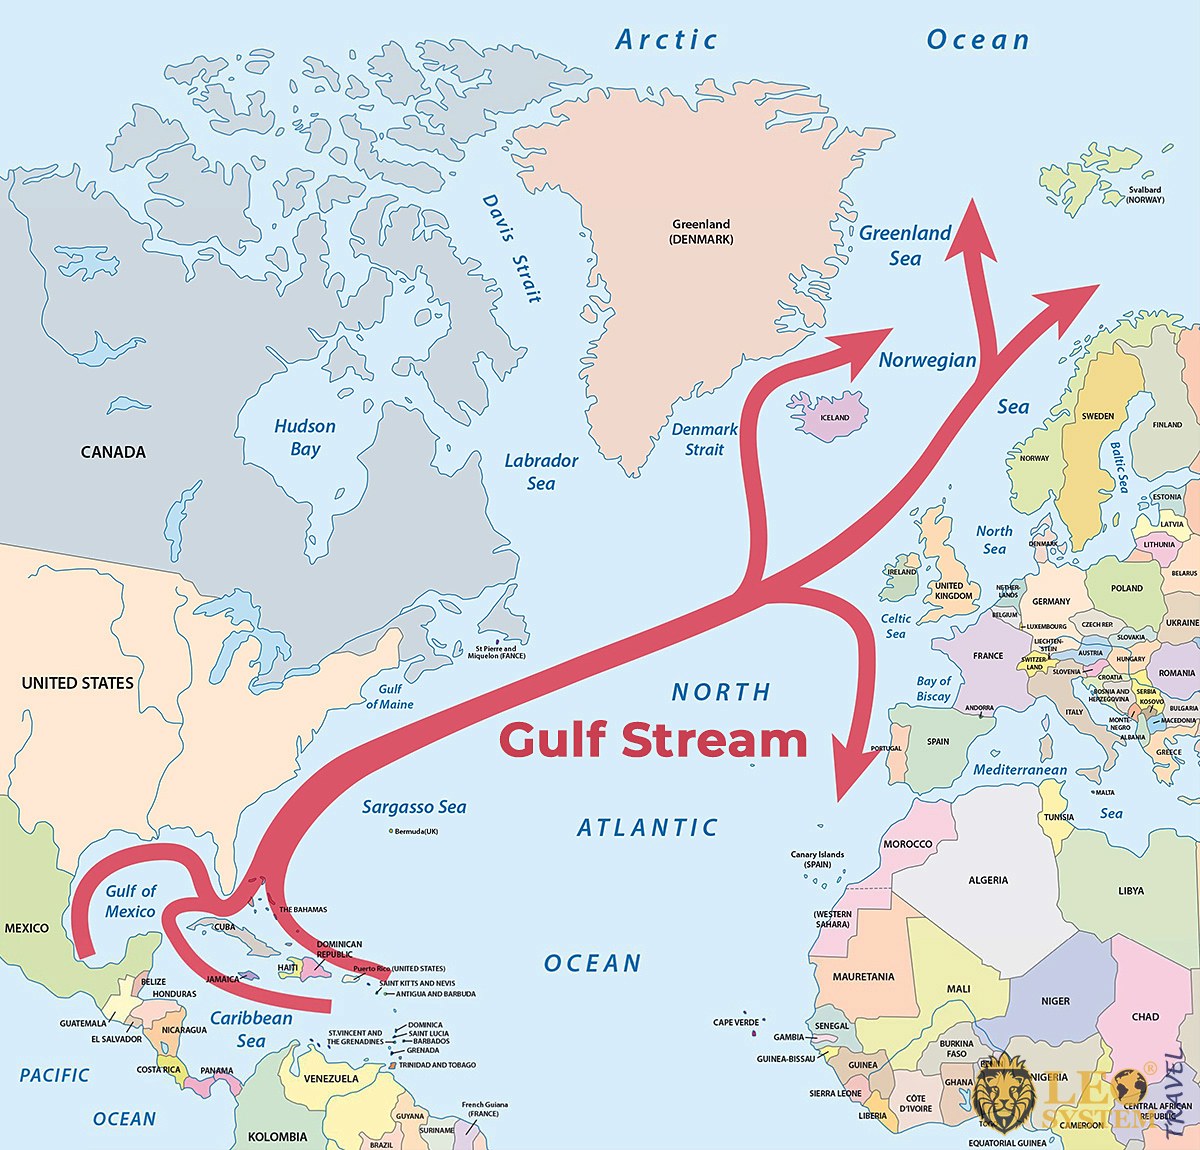 Image of a map of the world with the Gulf Stream